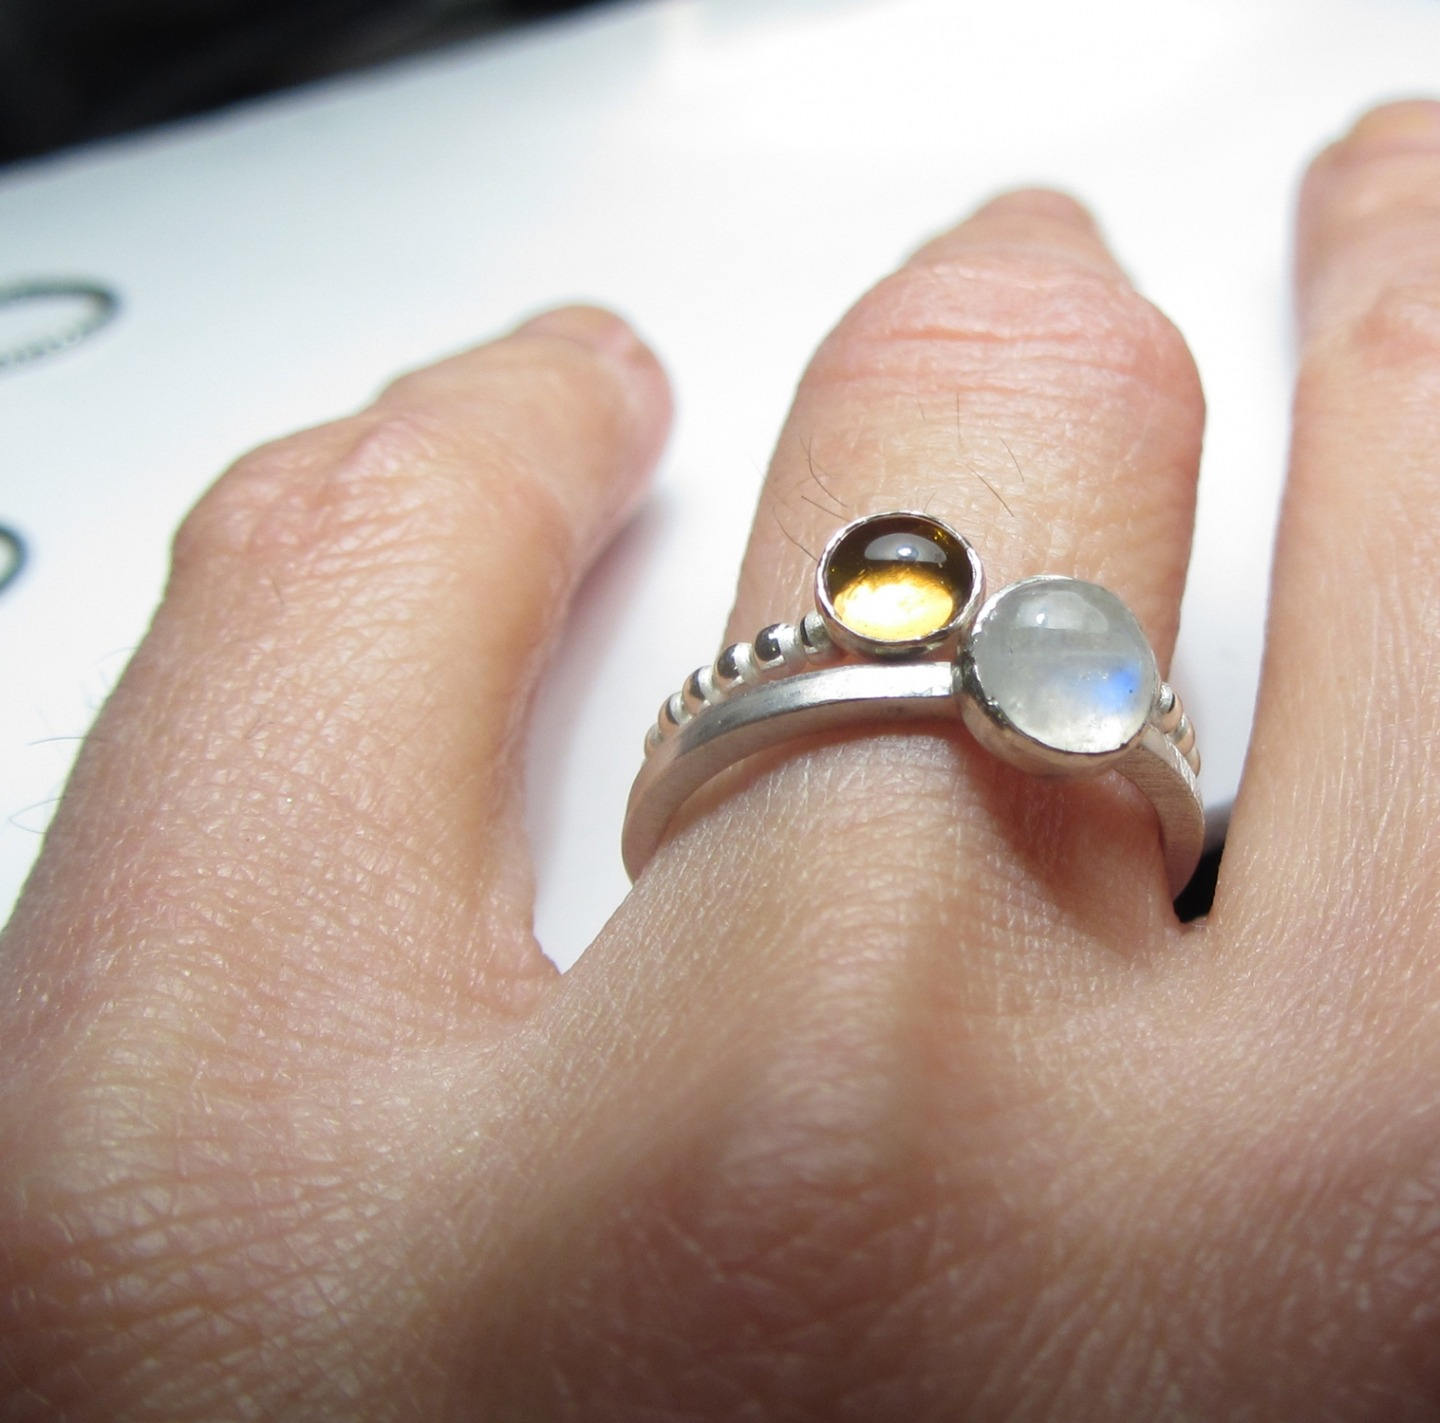 Set of 2 Sterling silver rings with natural gemstones cabochons, mini rings with yellow citrine and white moonstone